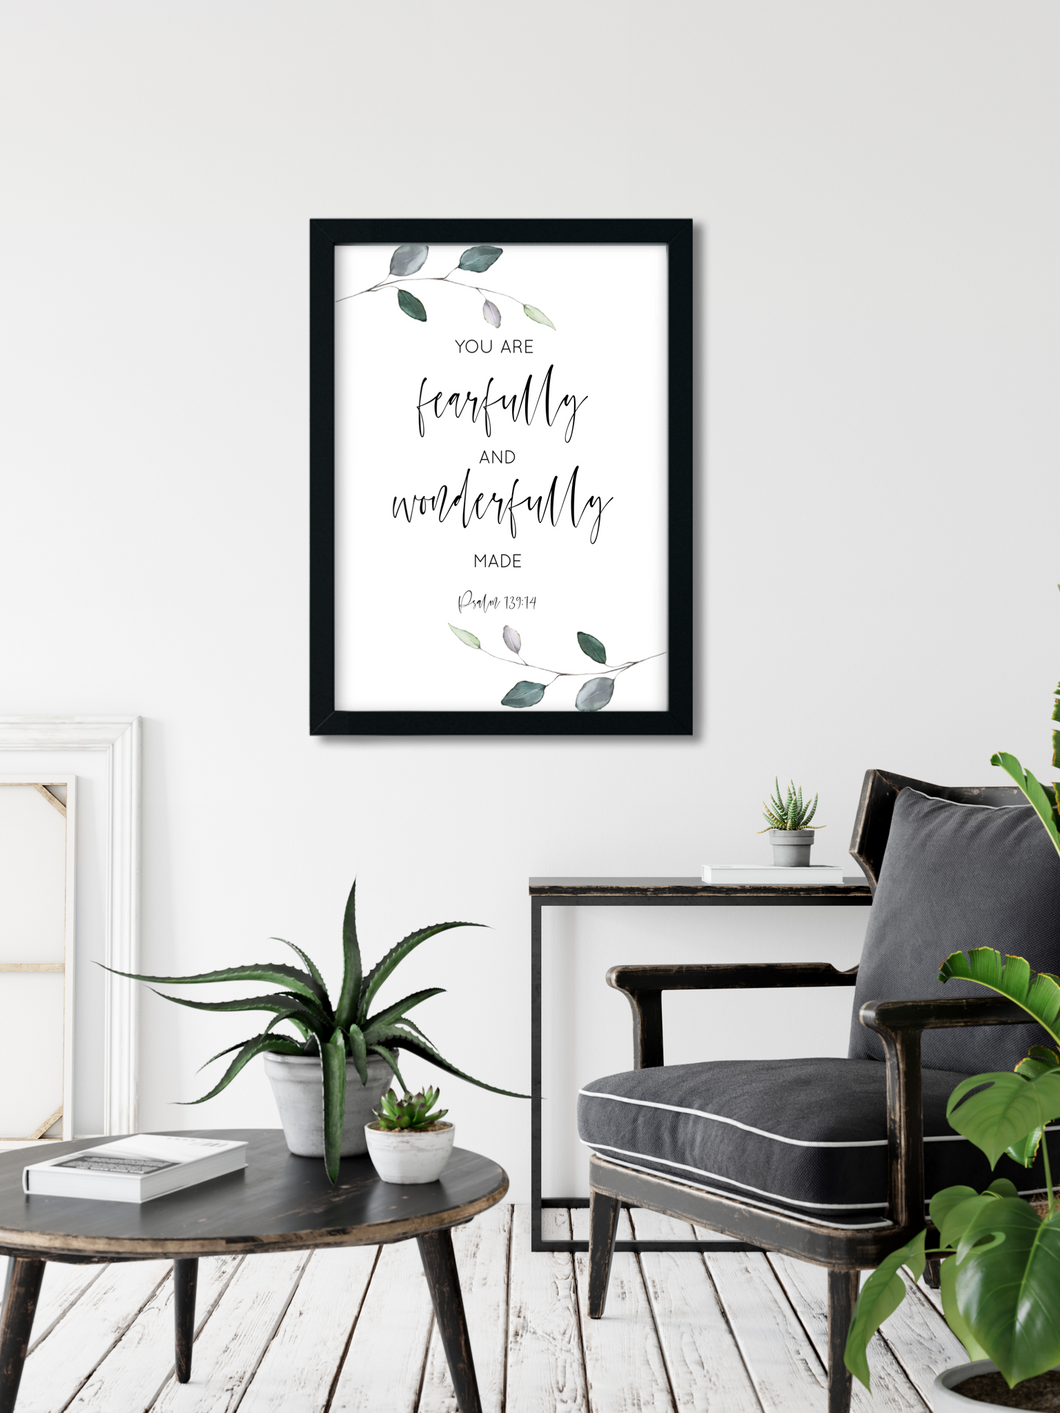 You are fearfully and wonderfully made 1.1 Printable